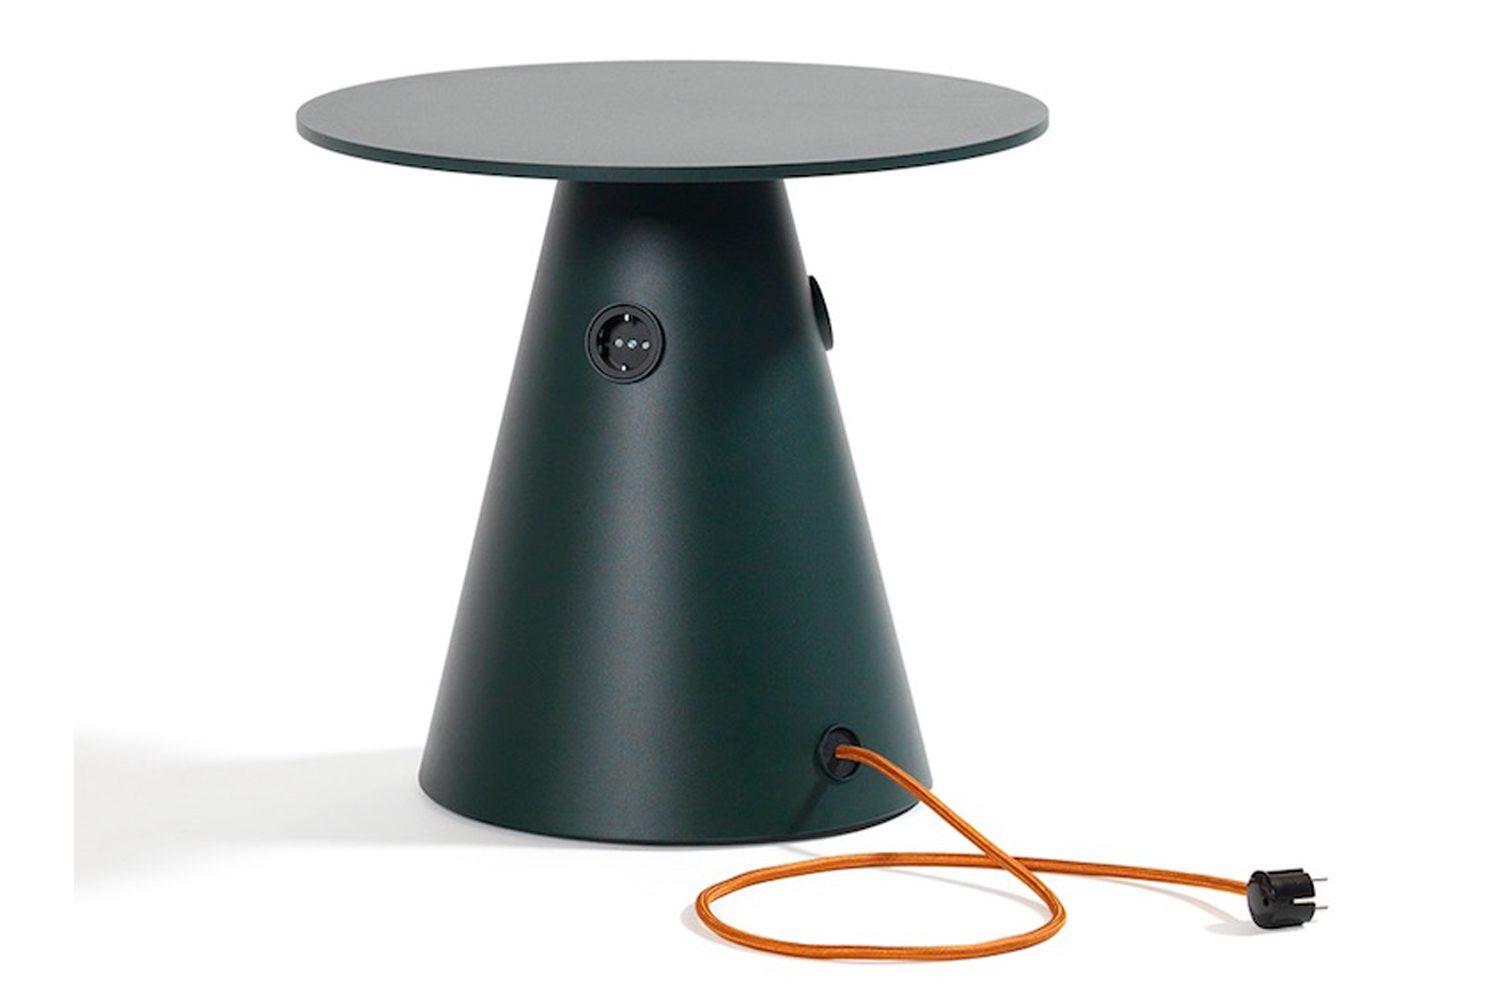 Introducing the Jack table by Bl Station 